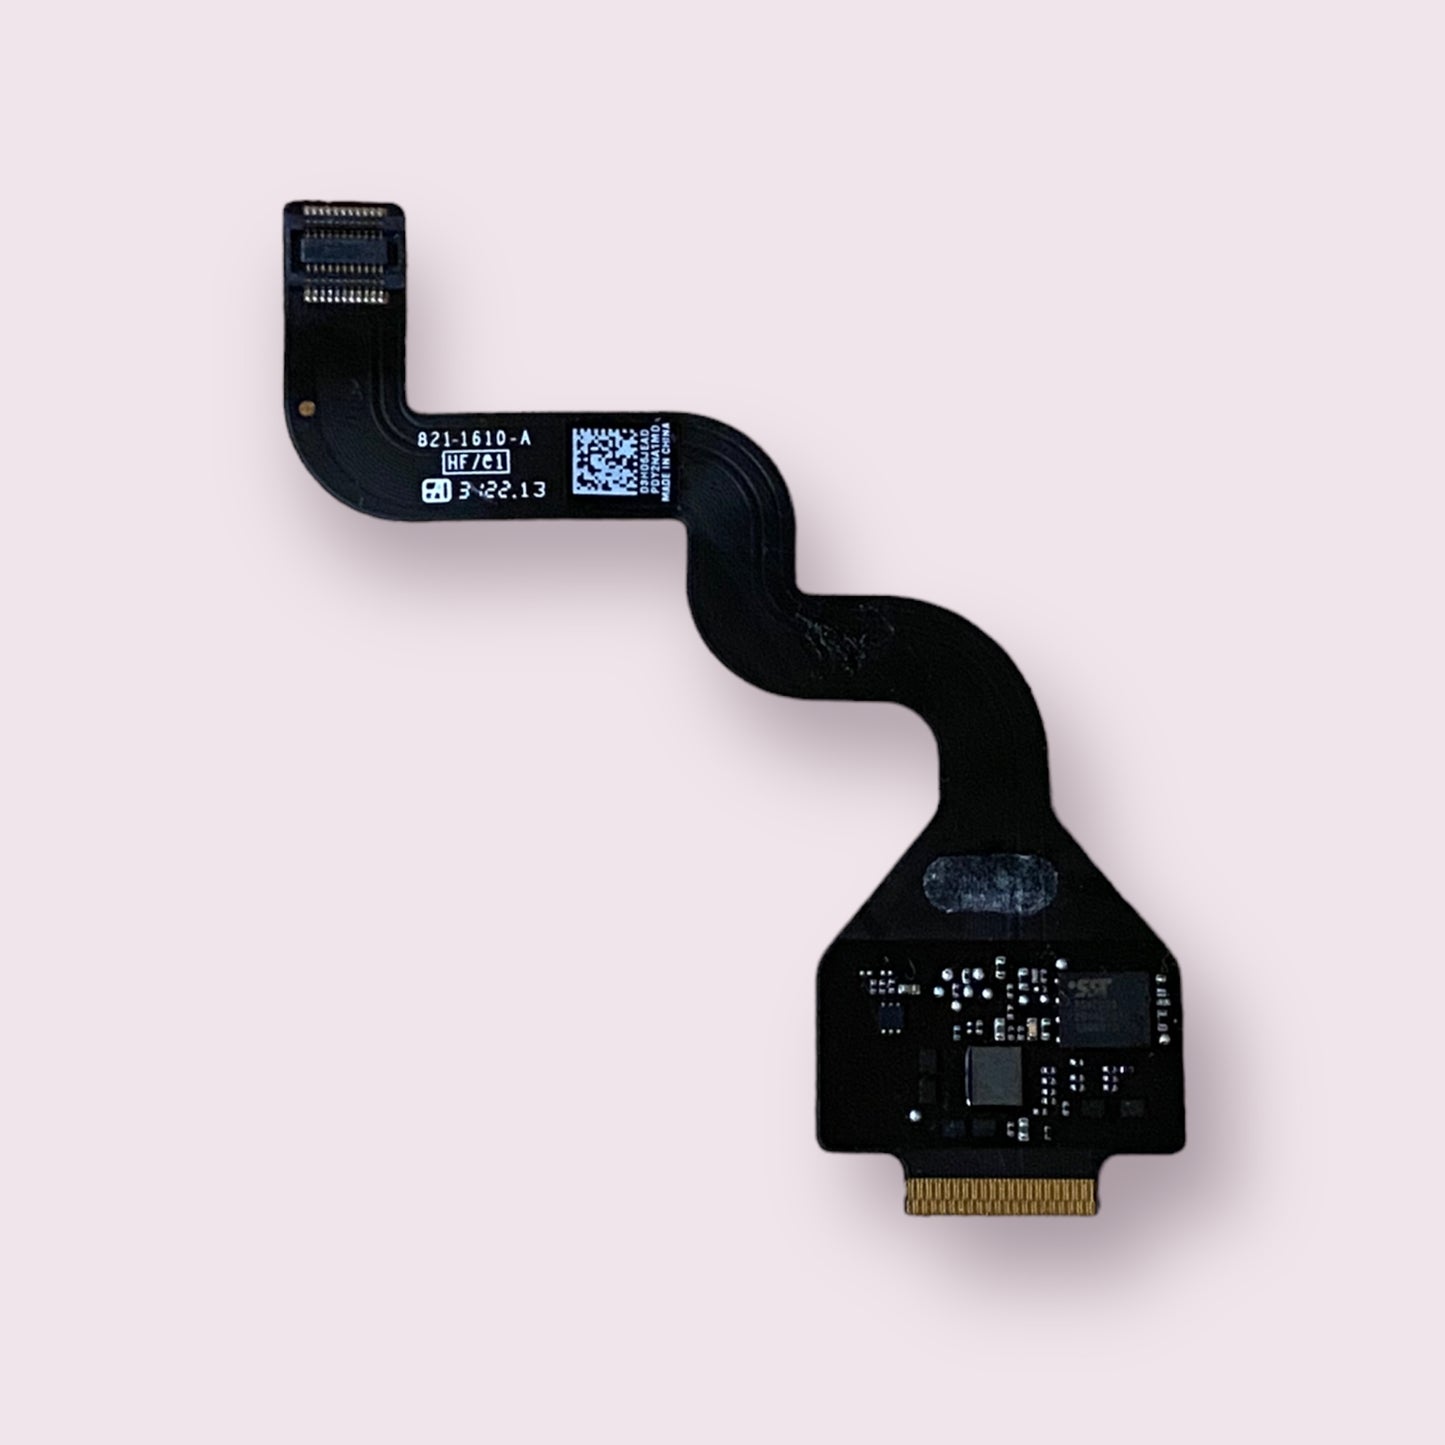 Macbook Pro 15" Early 2013 A1398 Trackpad Touchpad  Flex Cable 820-1610-A - Genuine Pull Part